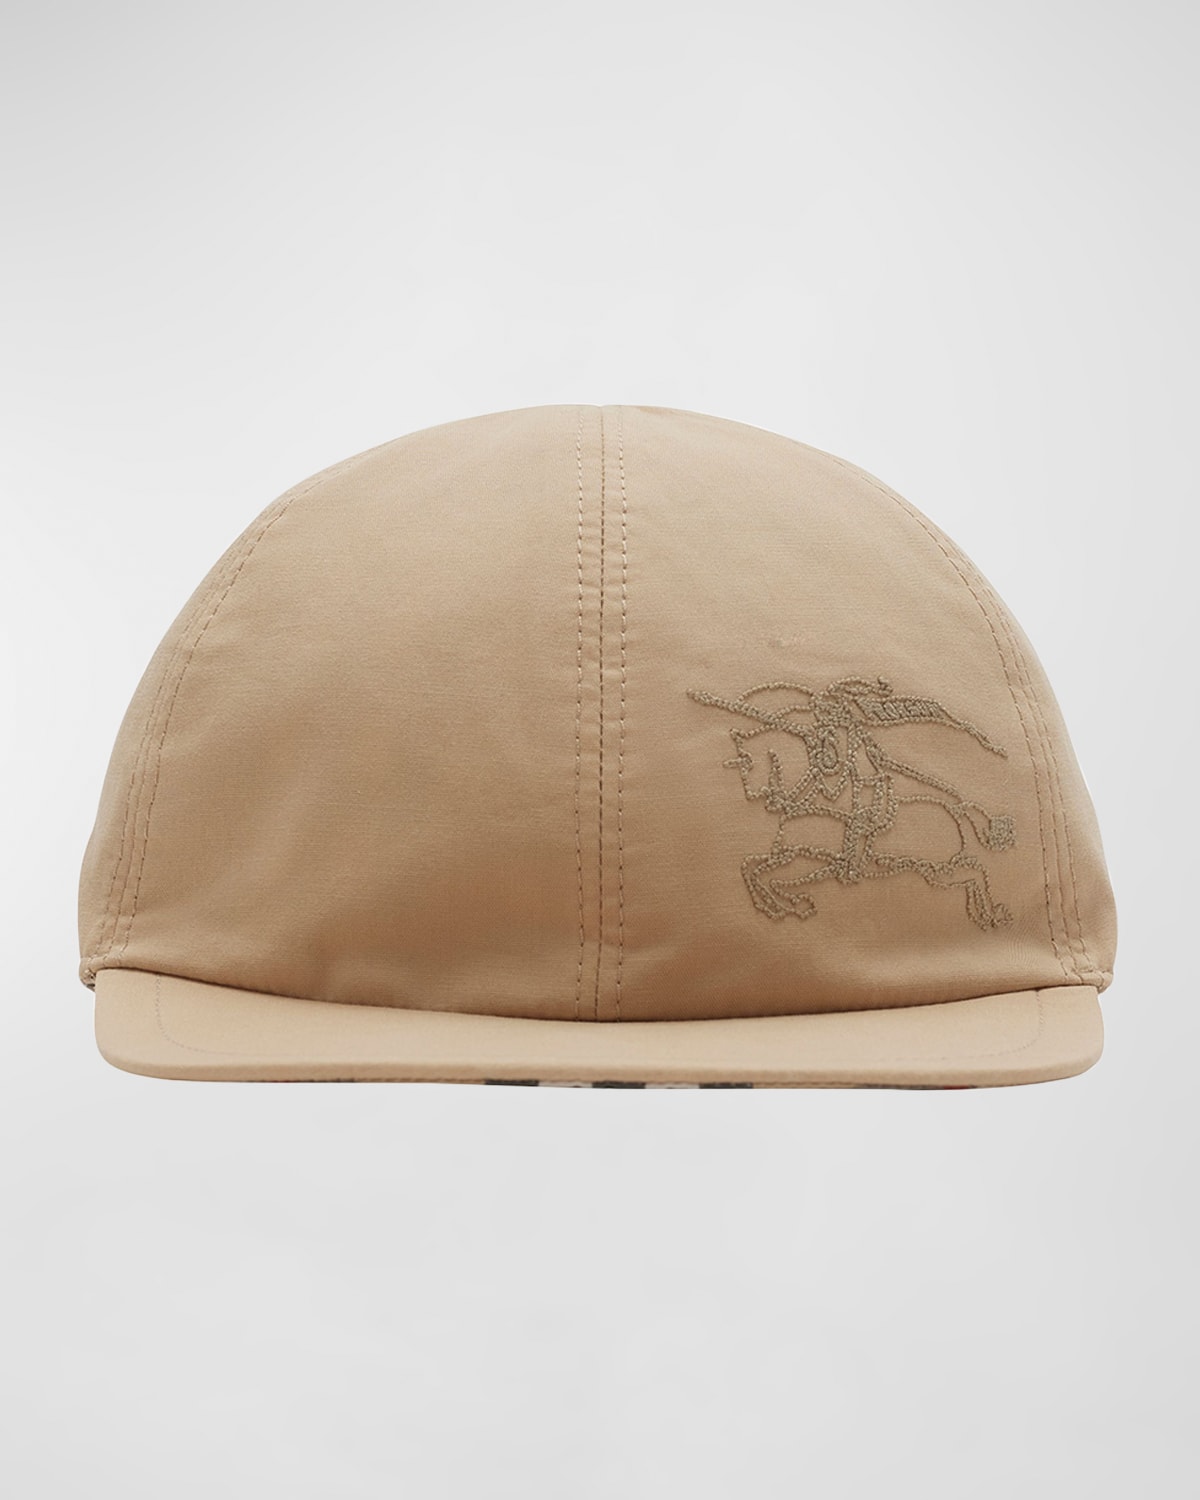 Burberry Kid's Embroidered Equestrian Knight Design Baseball Cap In Neutral